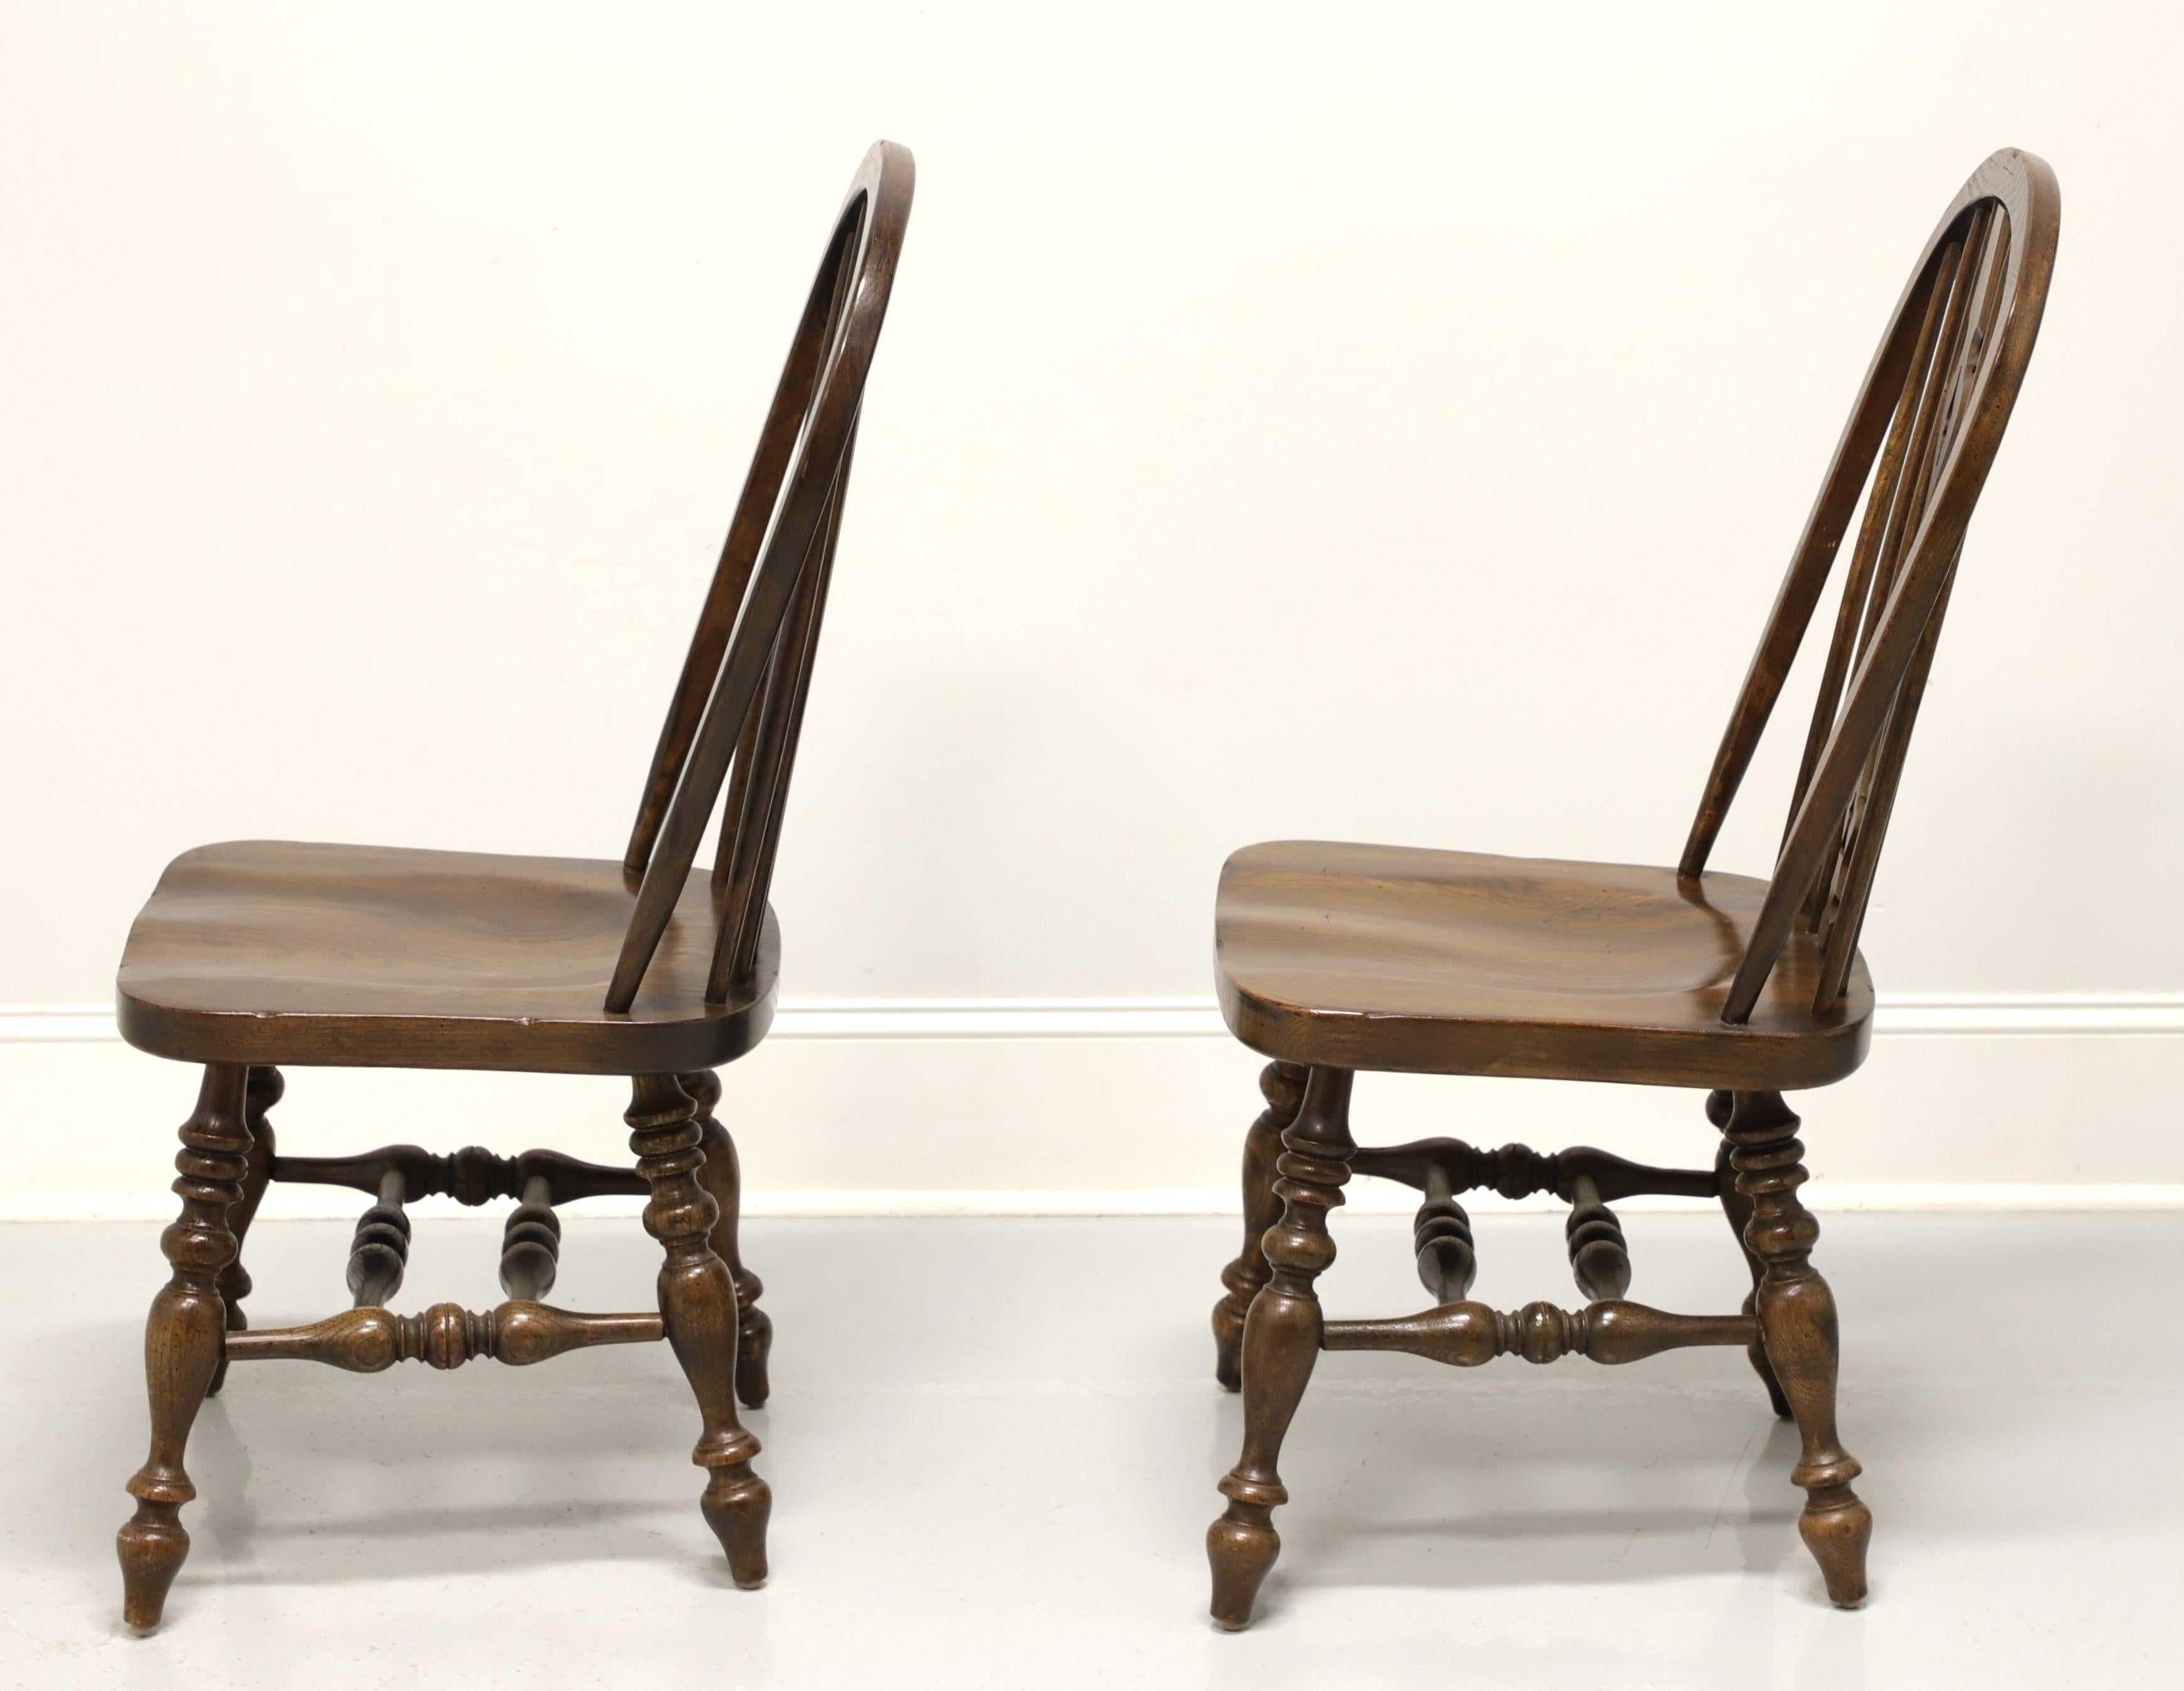 Other ETHAN ALLEN  Royal Charter Oak Bowback Windsor Dining Side Chairs - Pair B